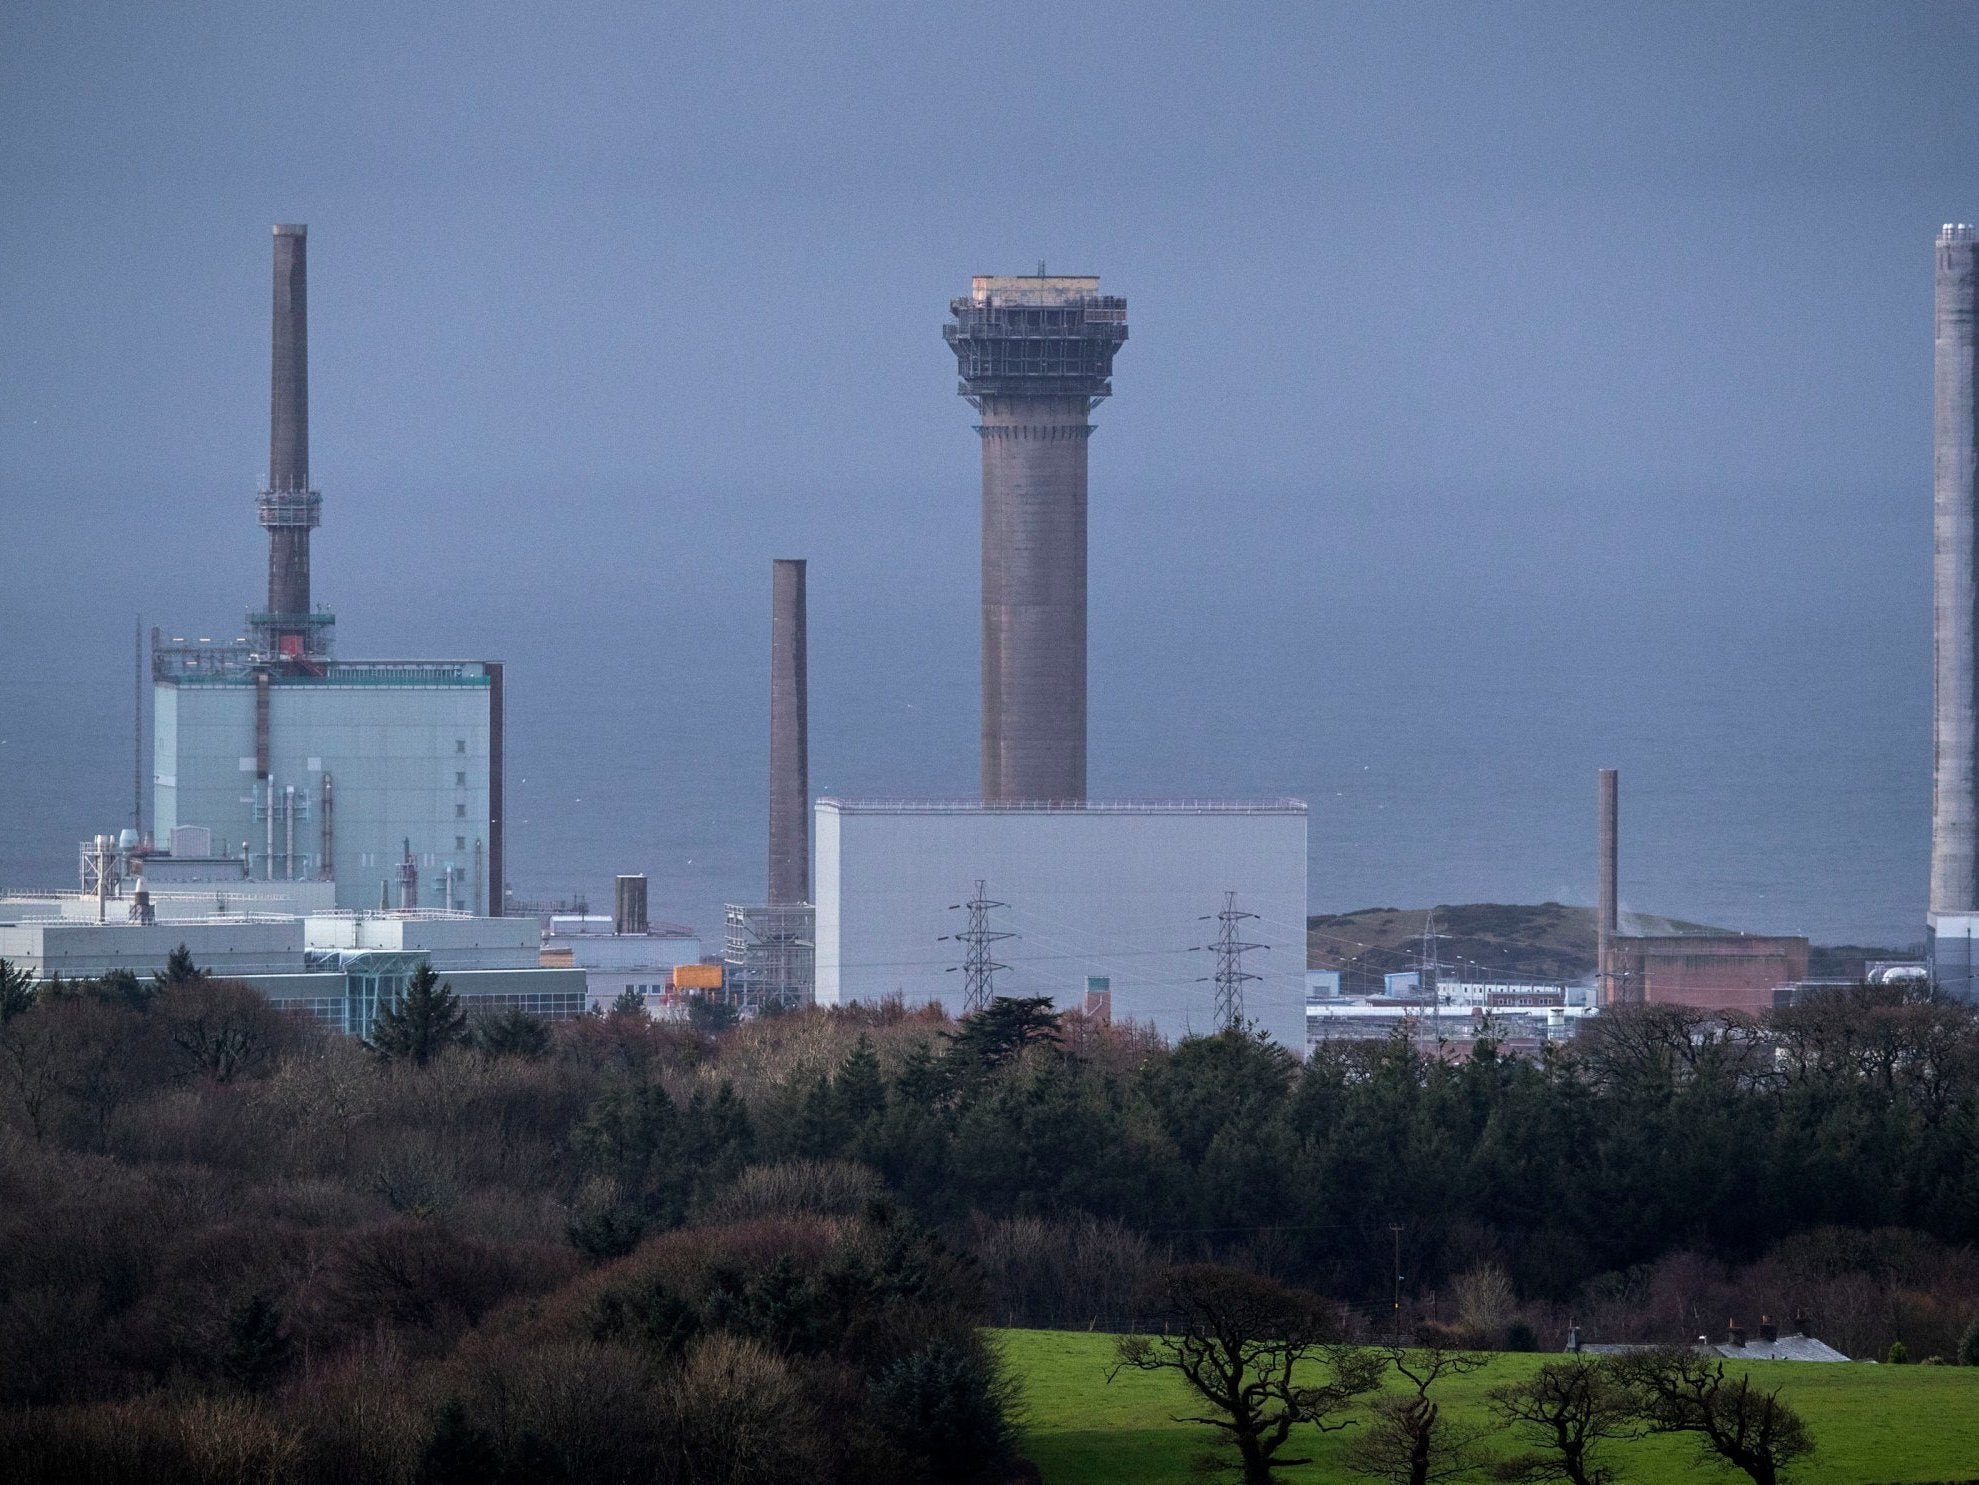 Most major projects at Sellafield in Cumbria are still 'significantly' delayed